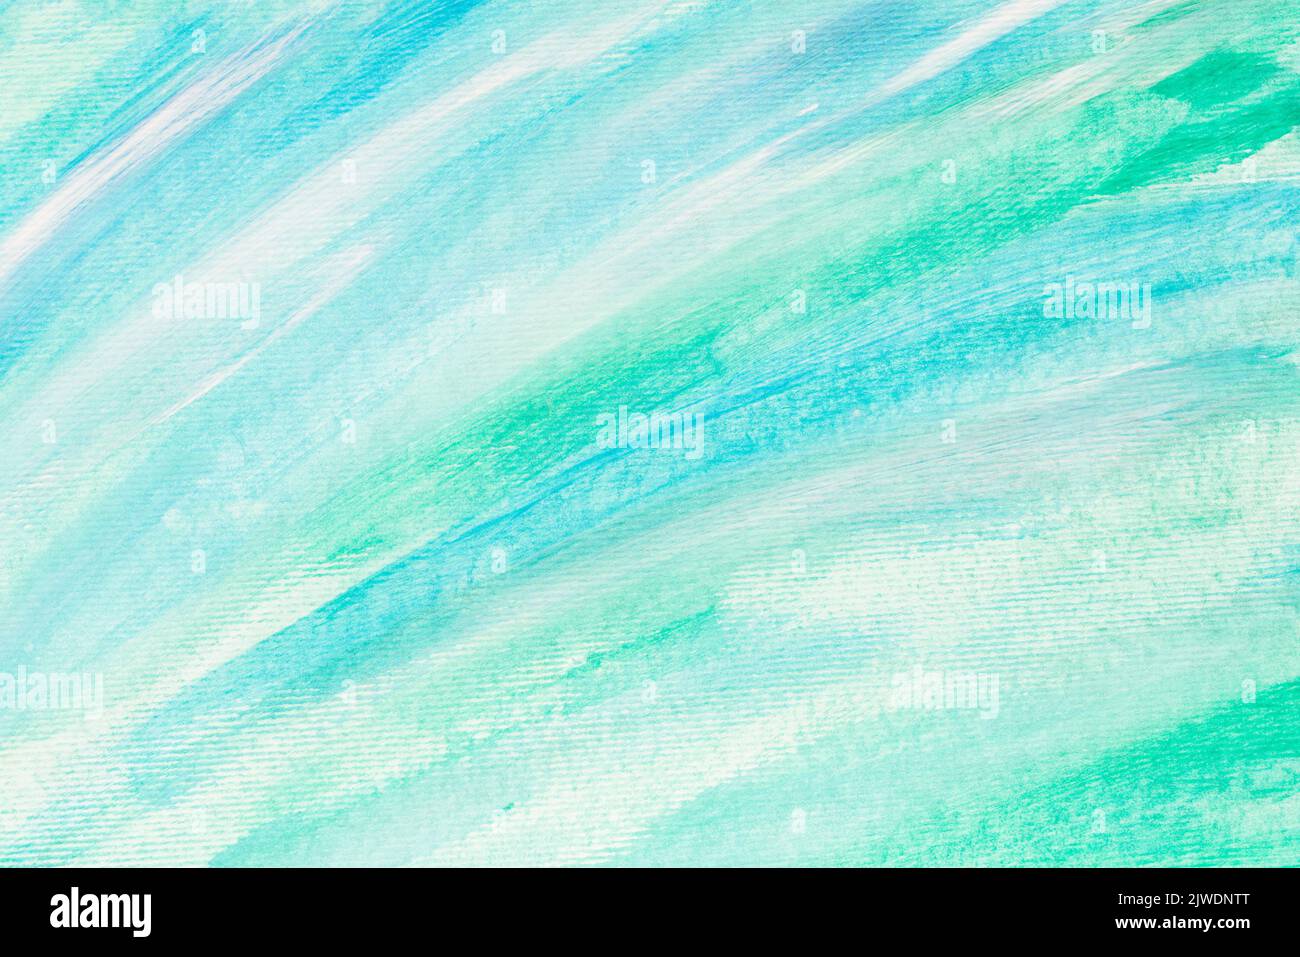 white, blue, turquoise colors painted paper background texture Stock Photo